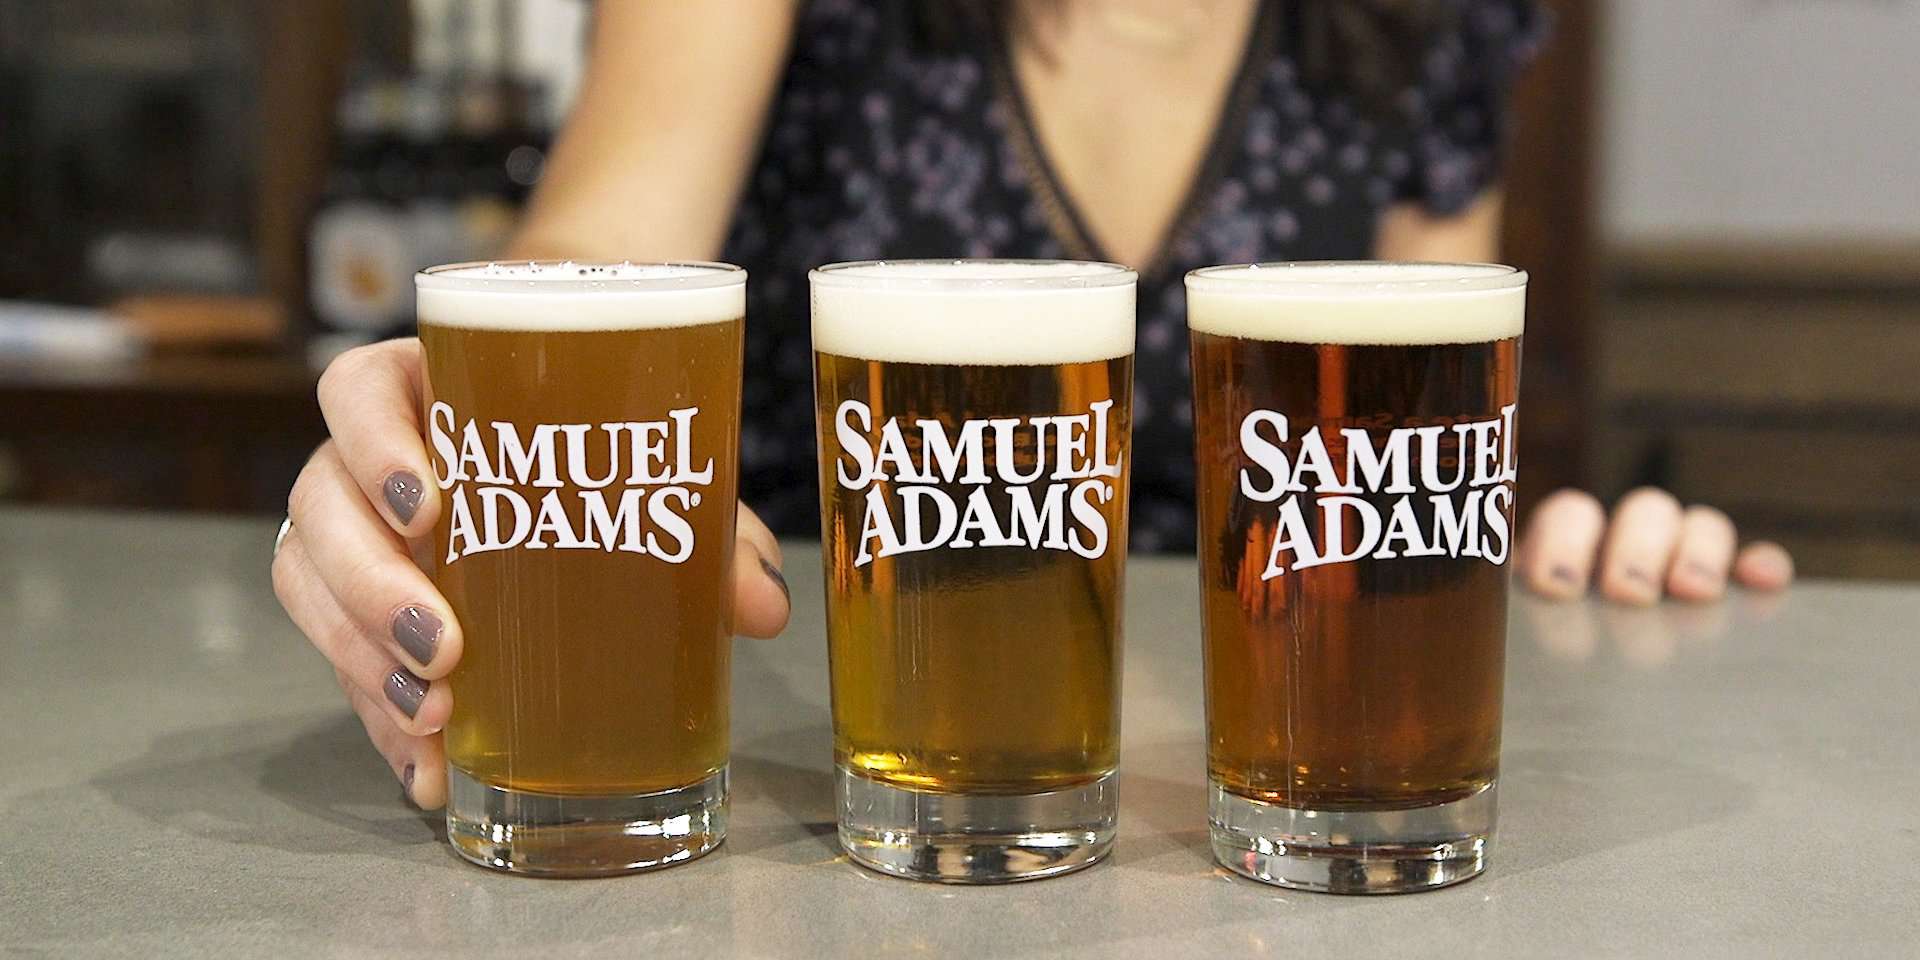 Taboola Ad Example 50021 - Samuel Adams Spearheaded The Craft Beer Craze That's Now A $26 Billion Industry In America. See Inside The Legendary Factory.